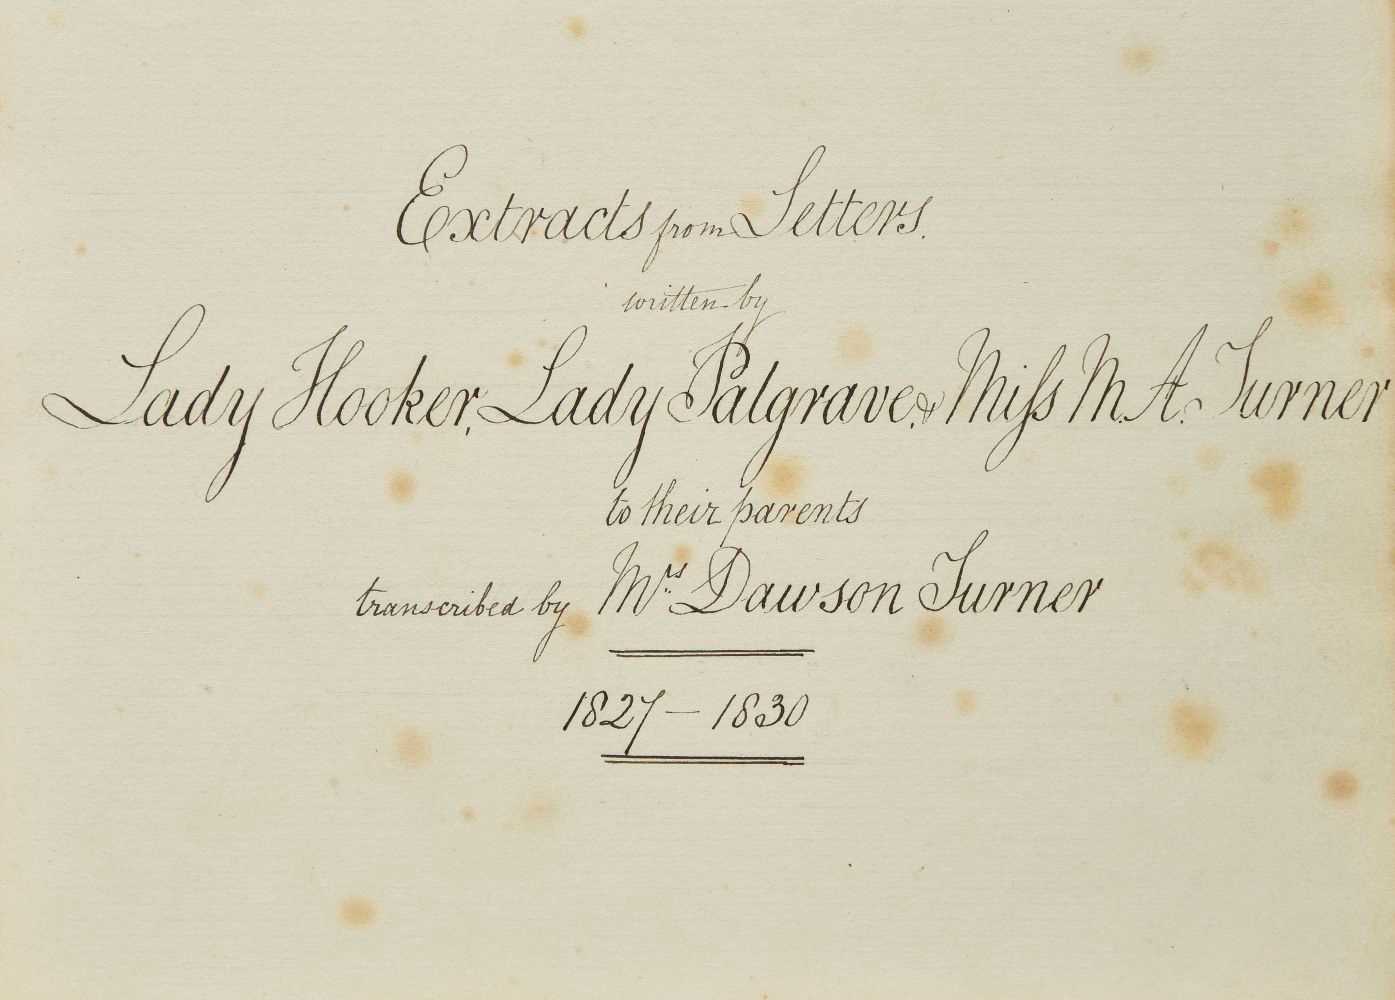 Lot 325 - Turner (Mary Dawson, 1774-1850). Extracts from Letters, written by Lady Hooker, Lady Palgrave